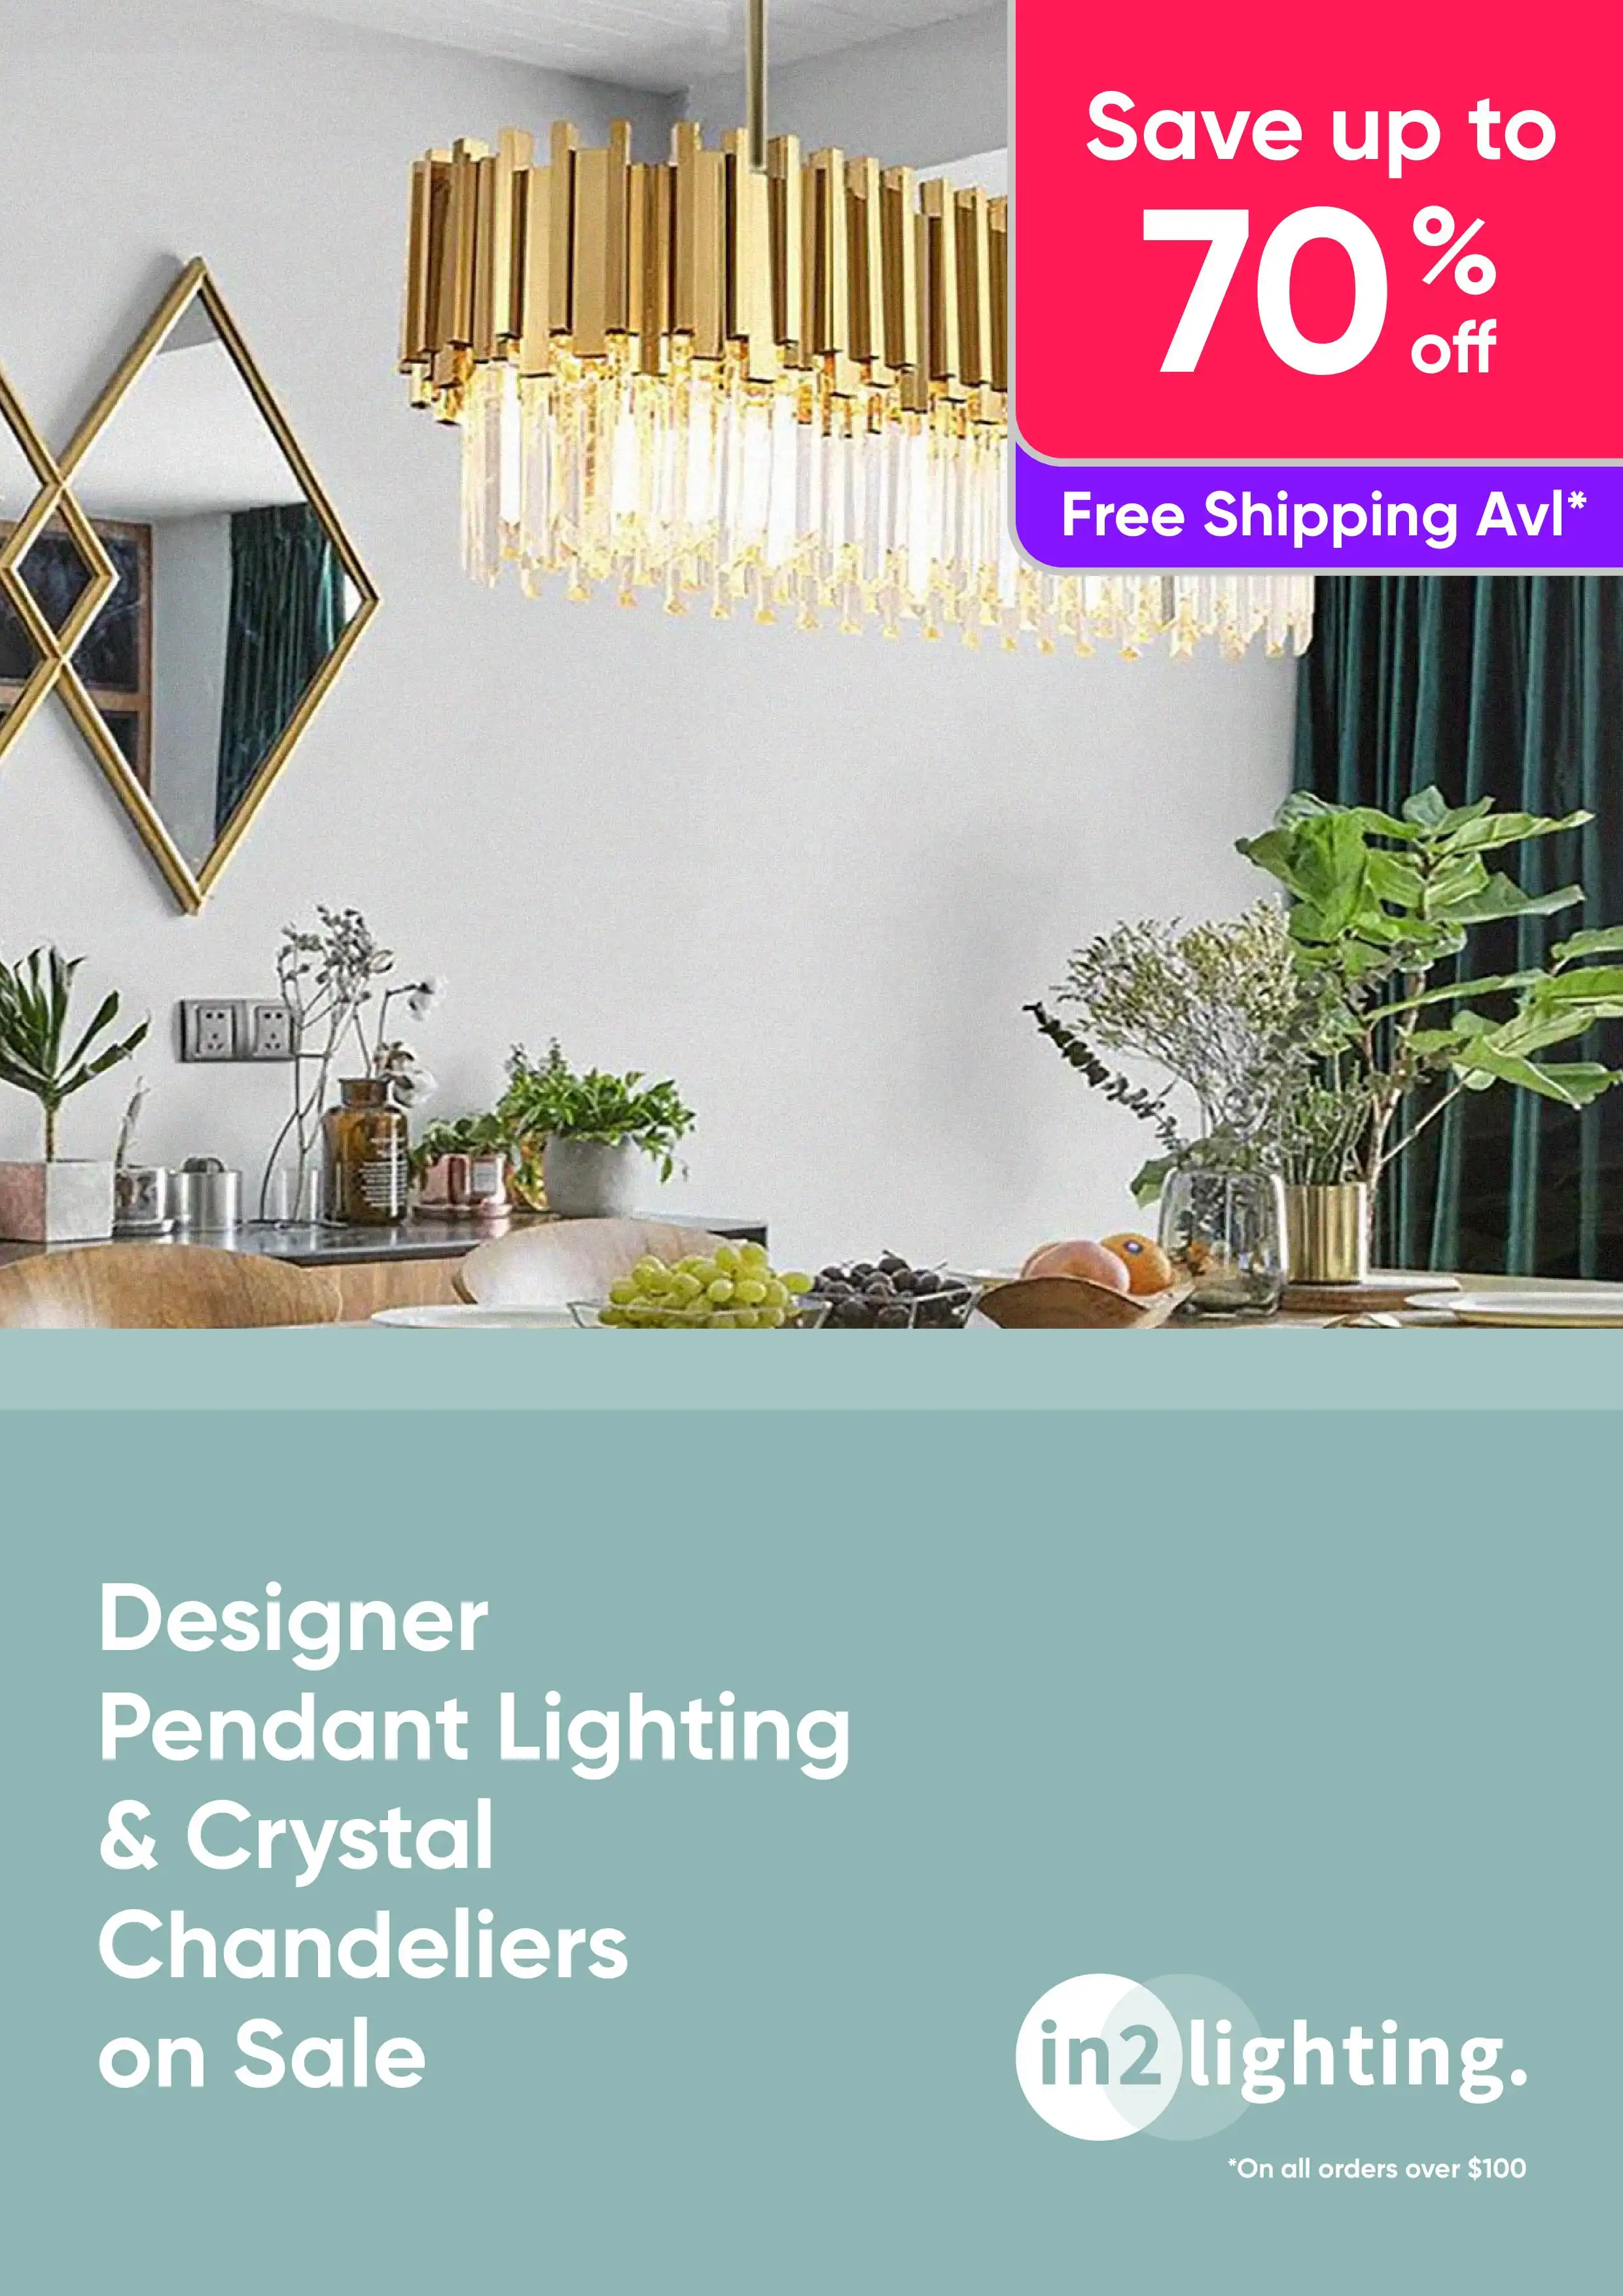 Shop Designer Pendant Lighting and Crystal Chandeliers - Up to 70% Off